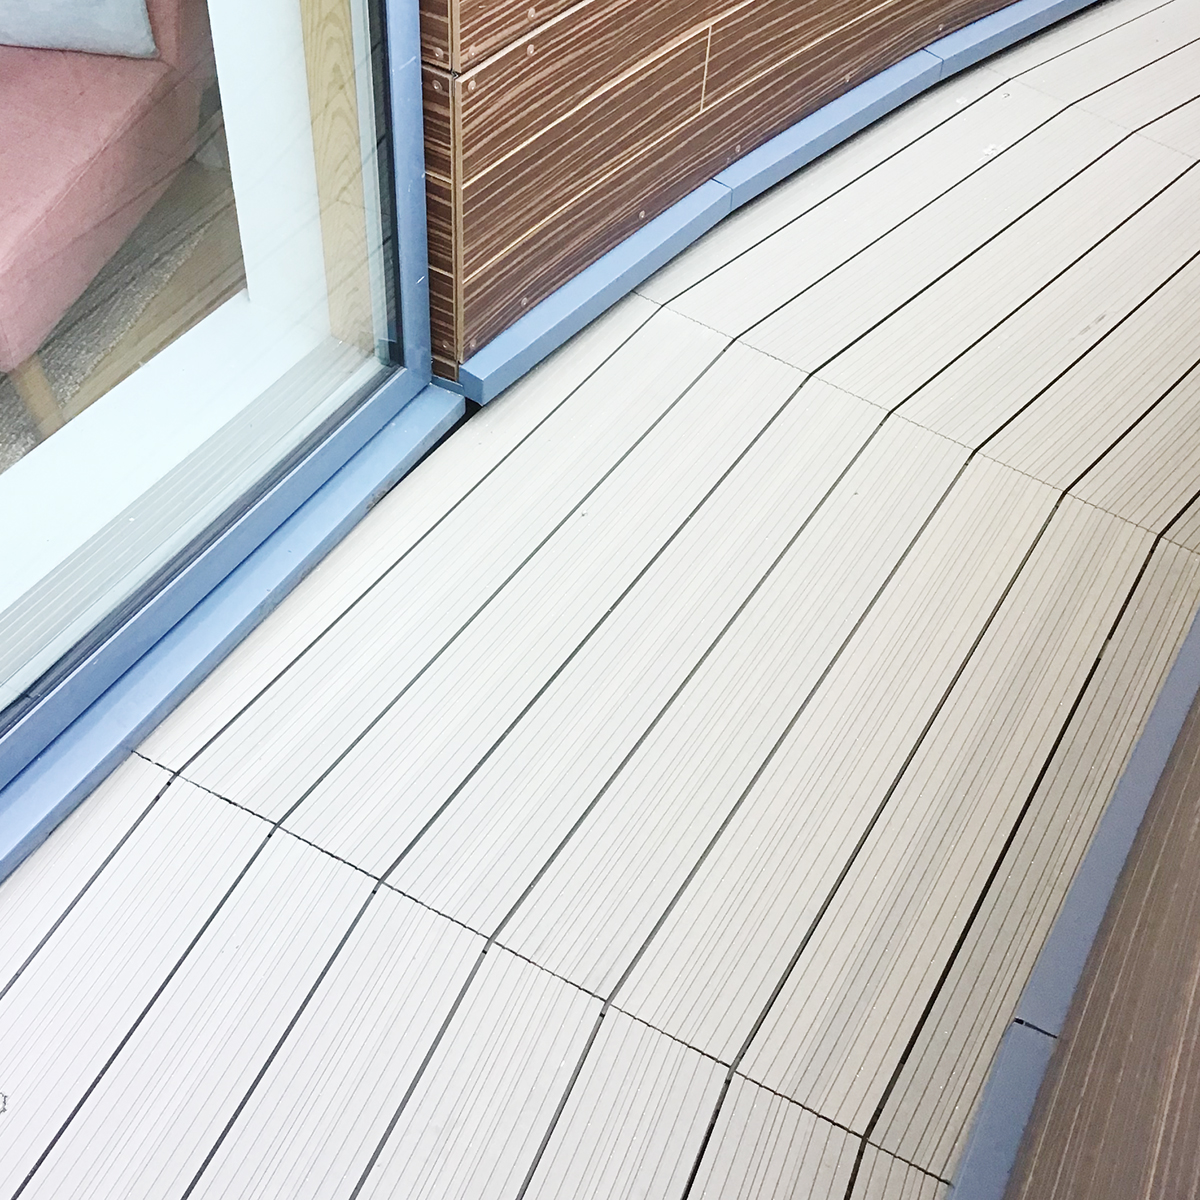 AliDeck collaborate closely with contractor to successfully deliver complex balcony refurbishment remediation package, aluminium decking system integrates seamlessly to project